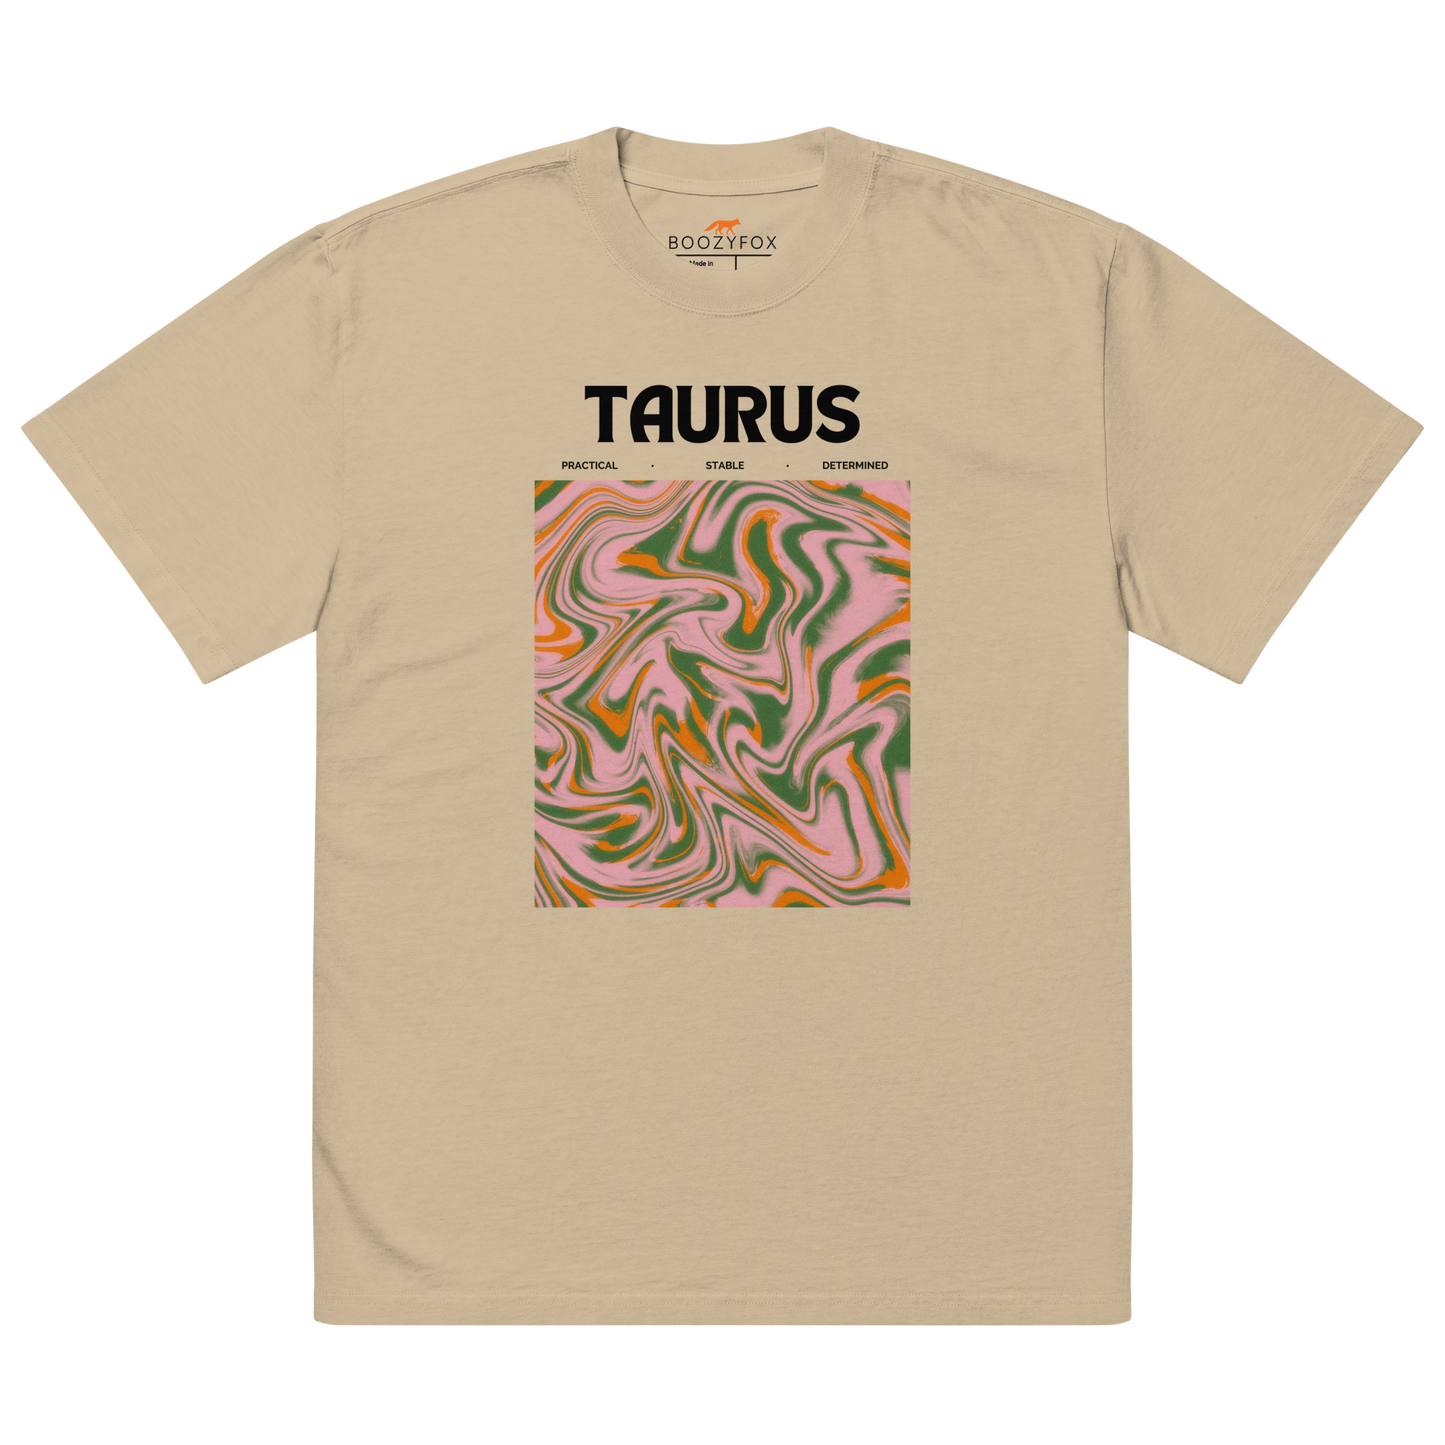 Faded Khaki Taurus Oversized T-Shirt featuring an Abstract Taurus Star Sign graphic on the chest - Cool Graphic Zodiac Oversized Tees - Boozy Fox